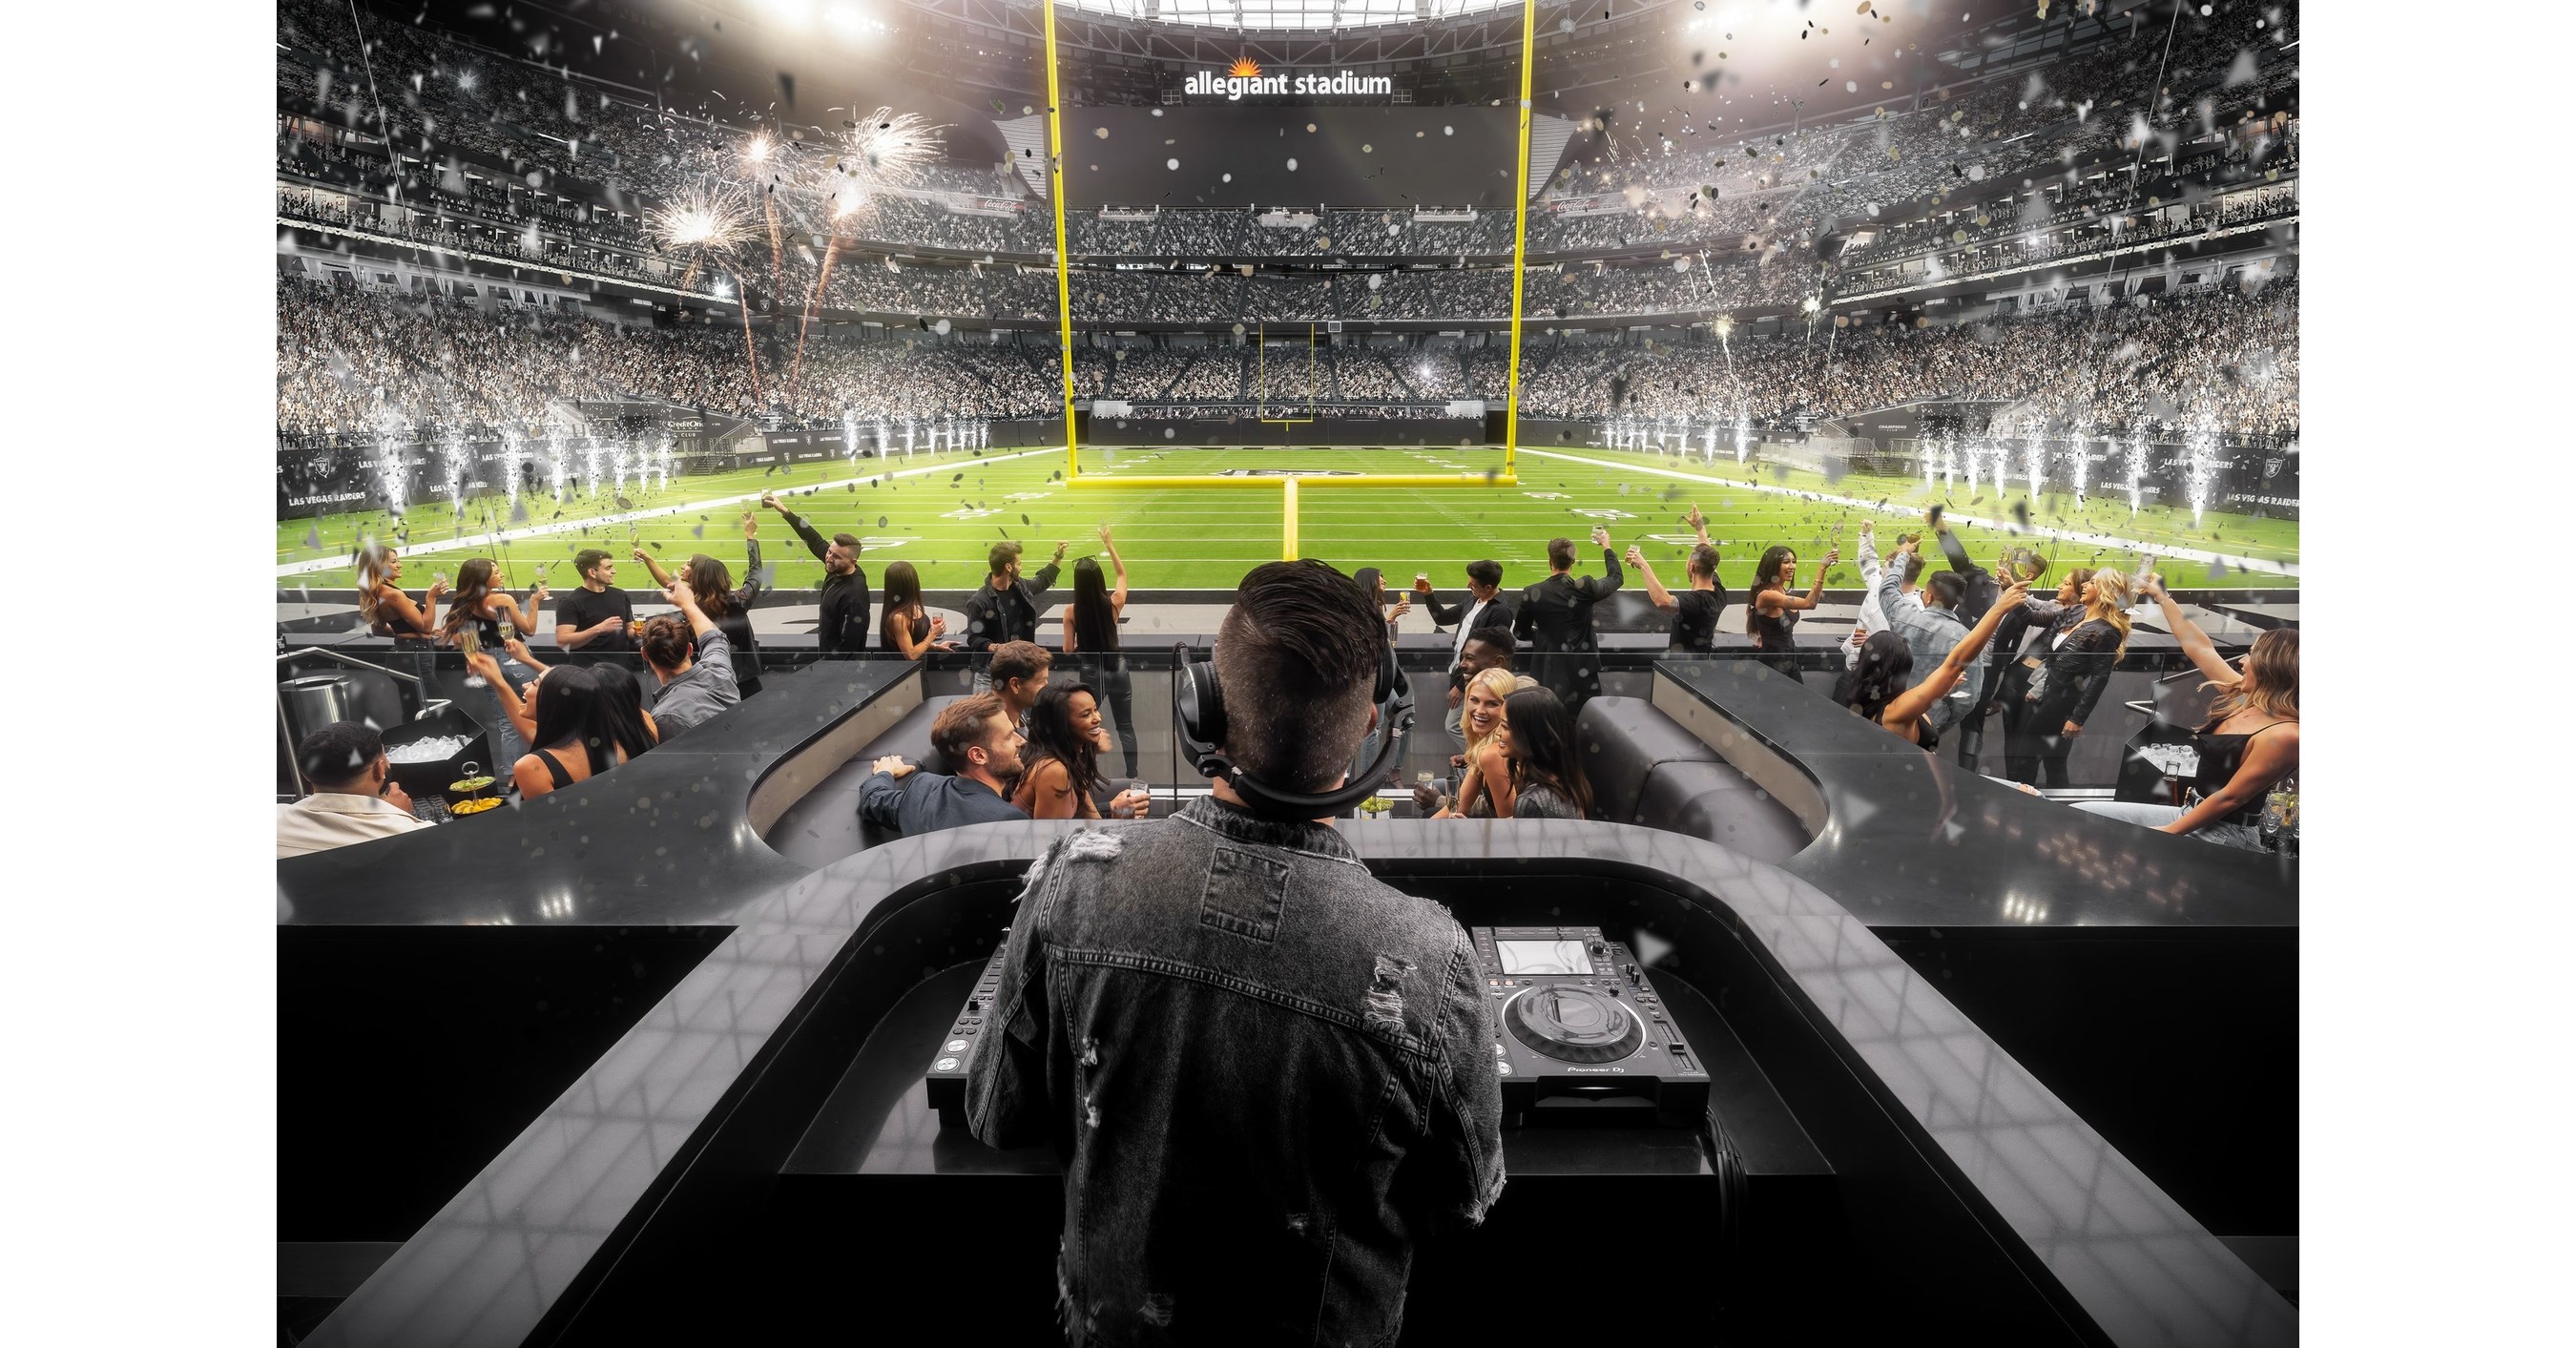 Las Vegas Raiders To Start Guided Tours and Drink With A View